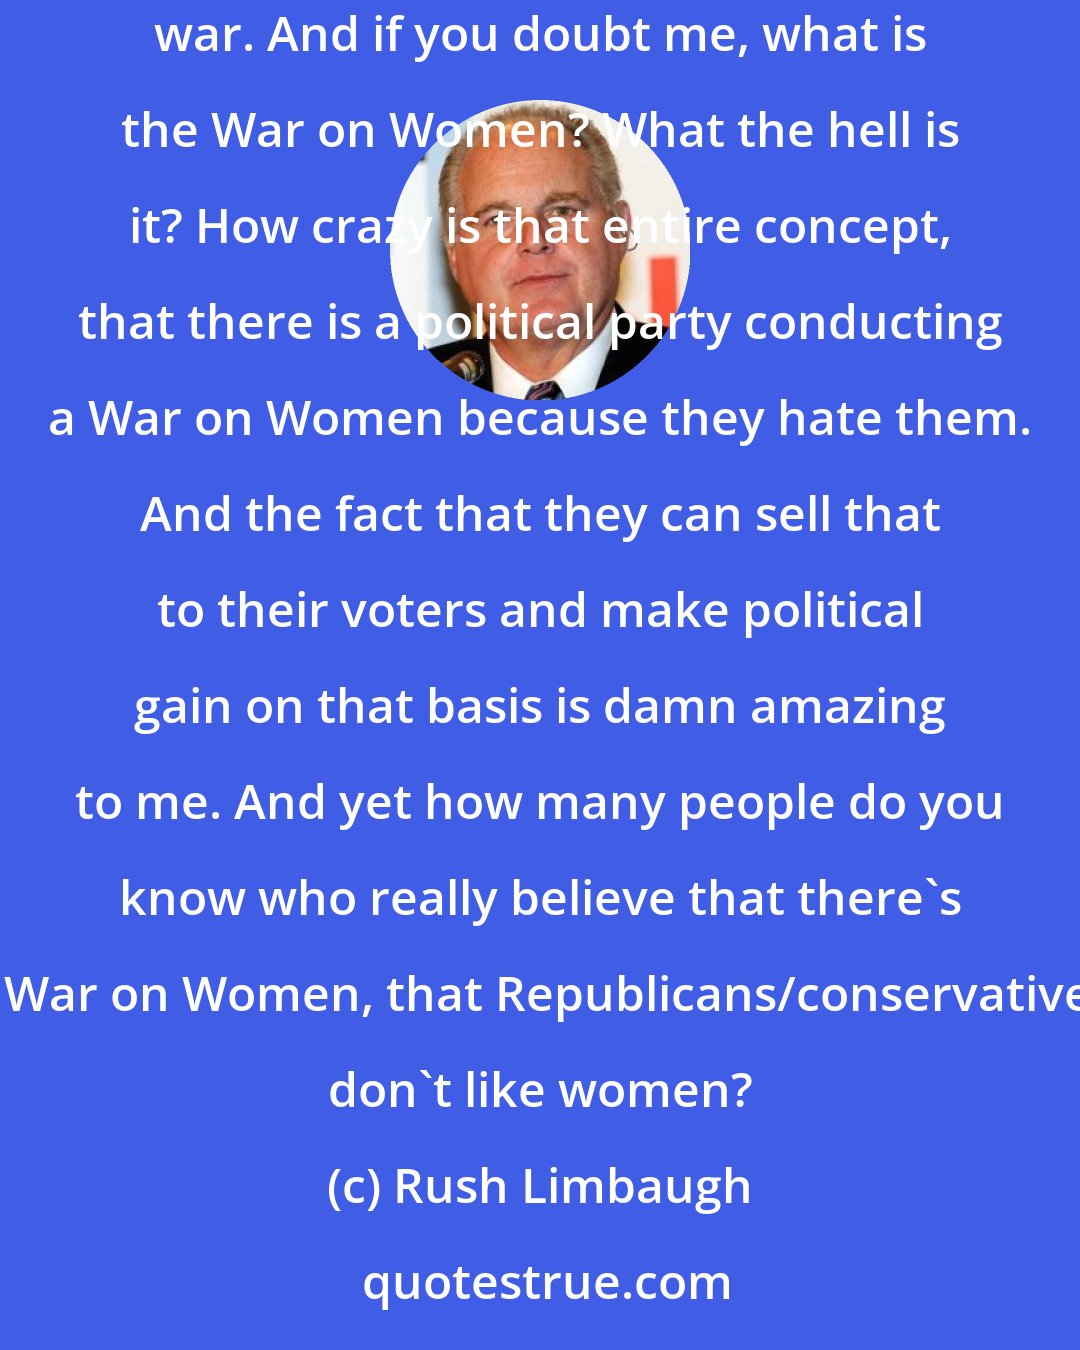 Rush Limbaugh: The left have taken a really beautiful thing, male-female relationships, and turned them into a battle, a political battle, an ideological war. And if you doubt me, what is the War on Women? What the hell is it? How crazy is that entire concept, that there is a political party conducting a War on Women because they hate them. And the fact that they can sell that to their voters and make political gain on that basis is damn amazing to me. And yet how many people do you know who really believe that there's a War on Women, that Republicans/conservatives don't like women?